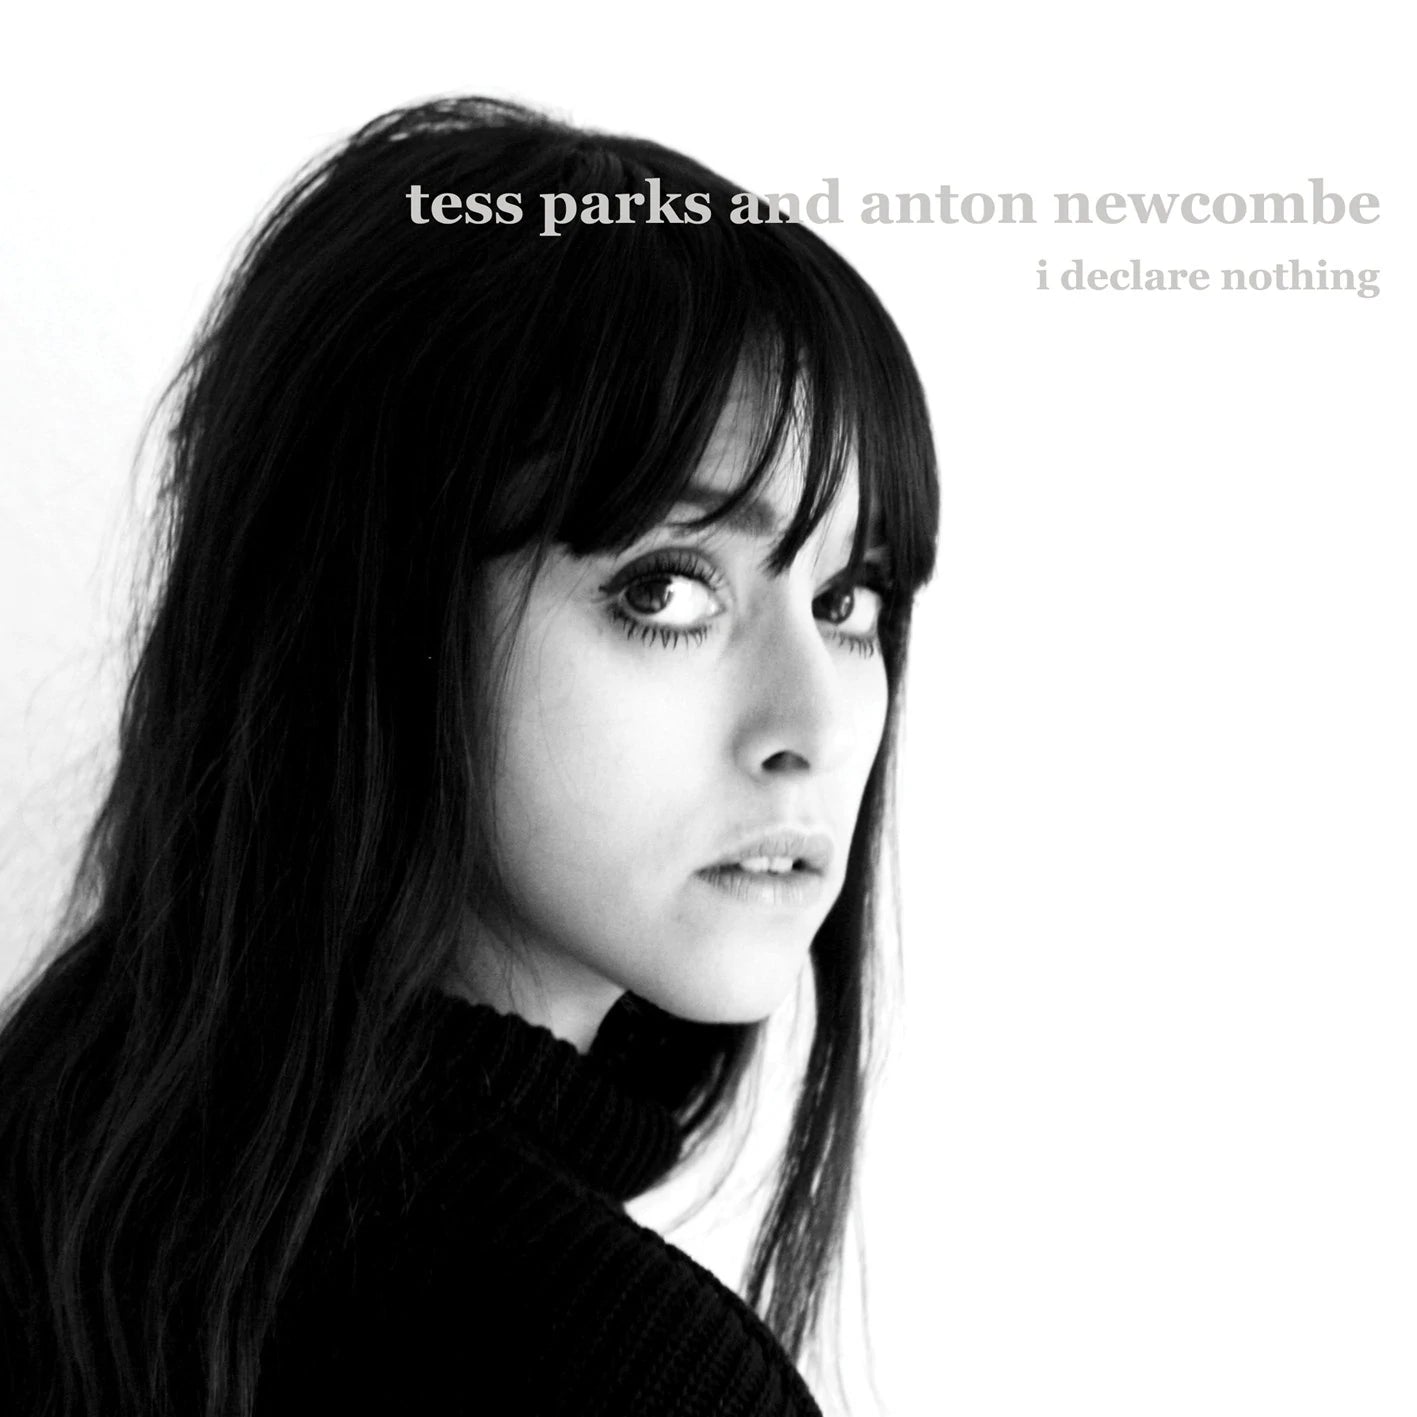 Tess Parks & Anton Newcombe - I Declare Nothing (a Recordings) LP